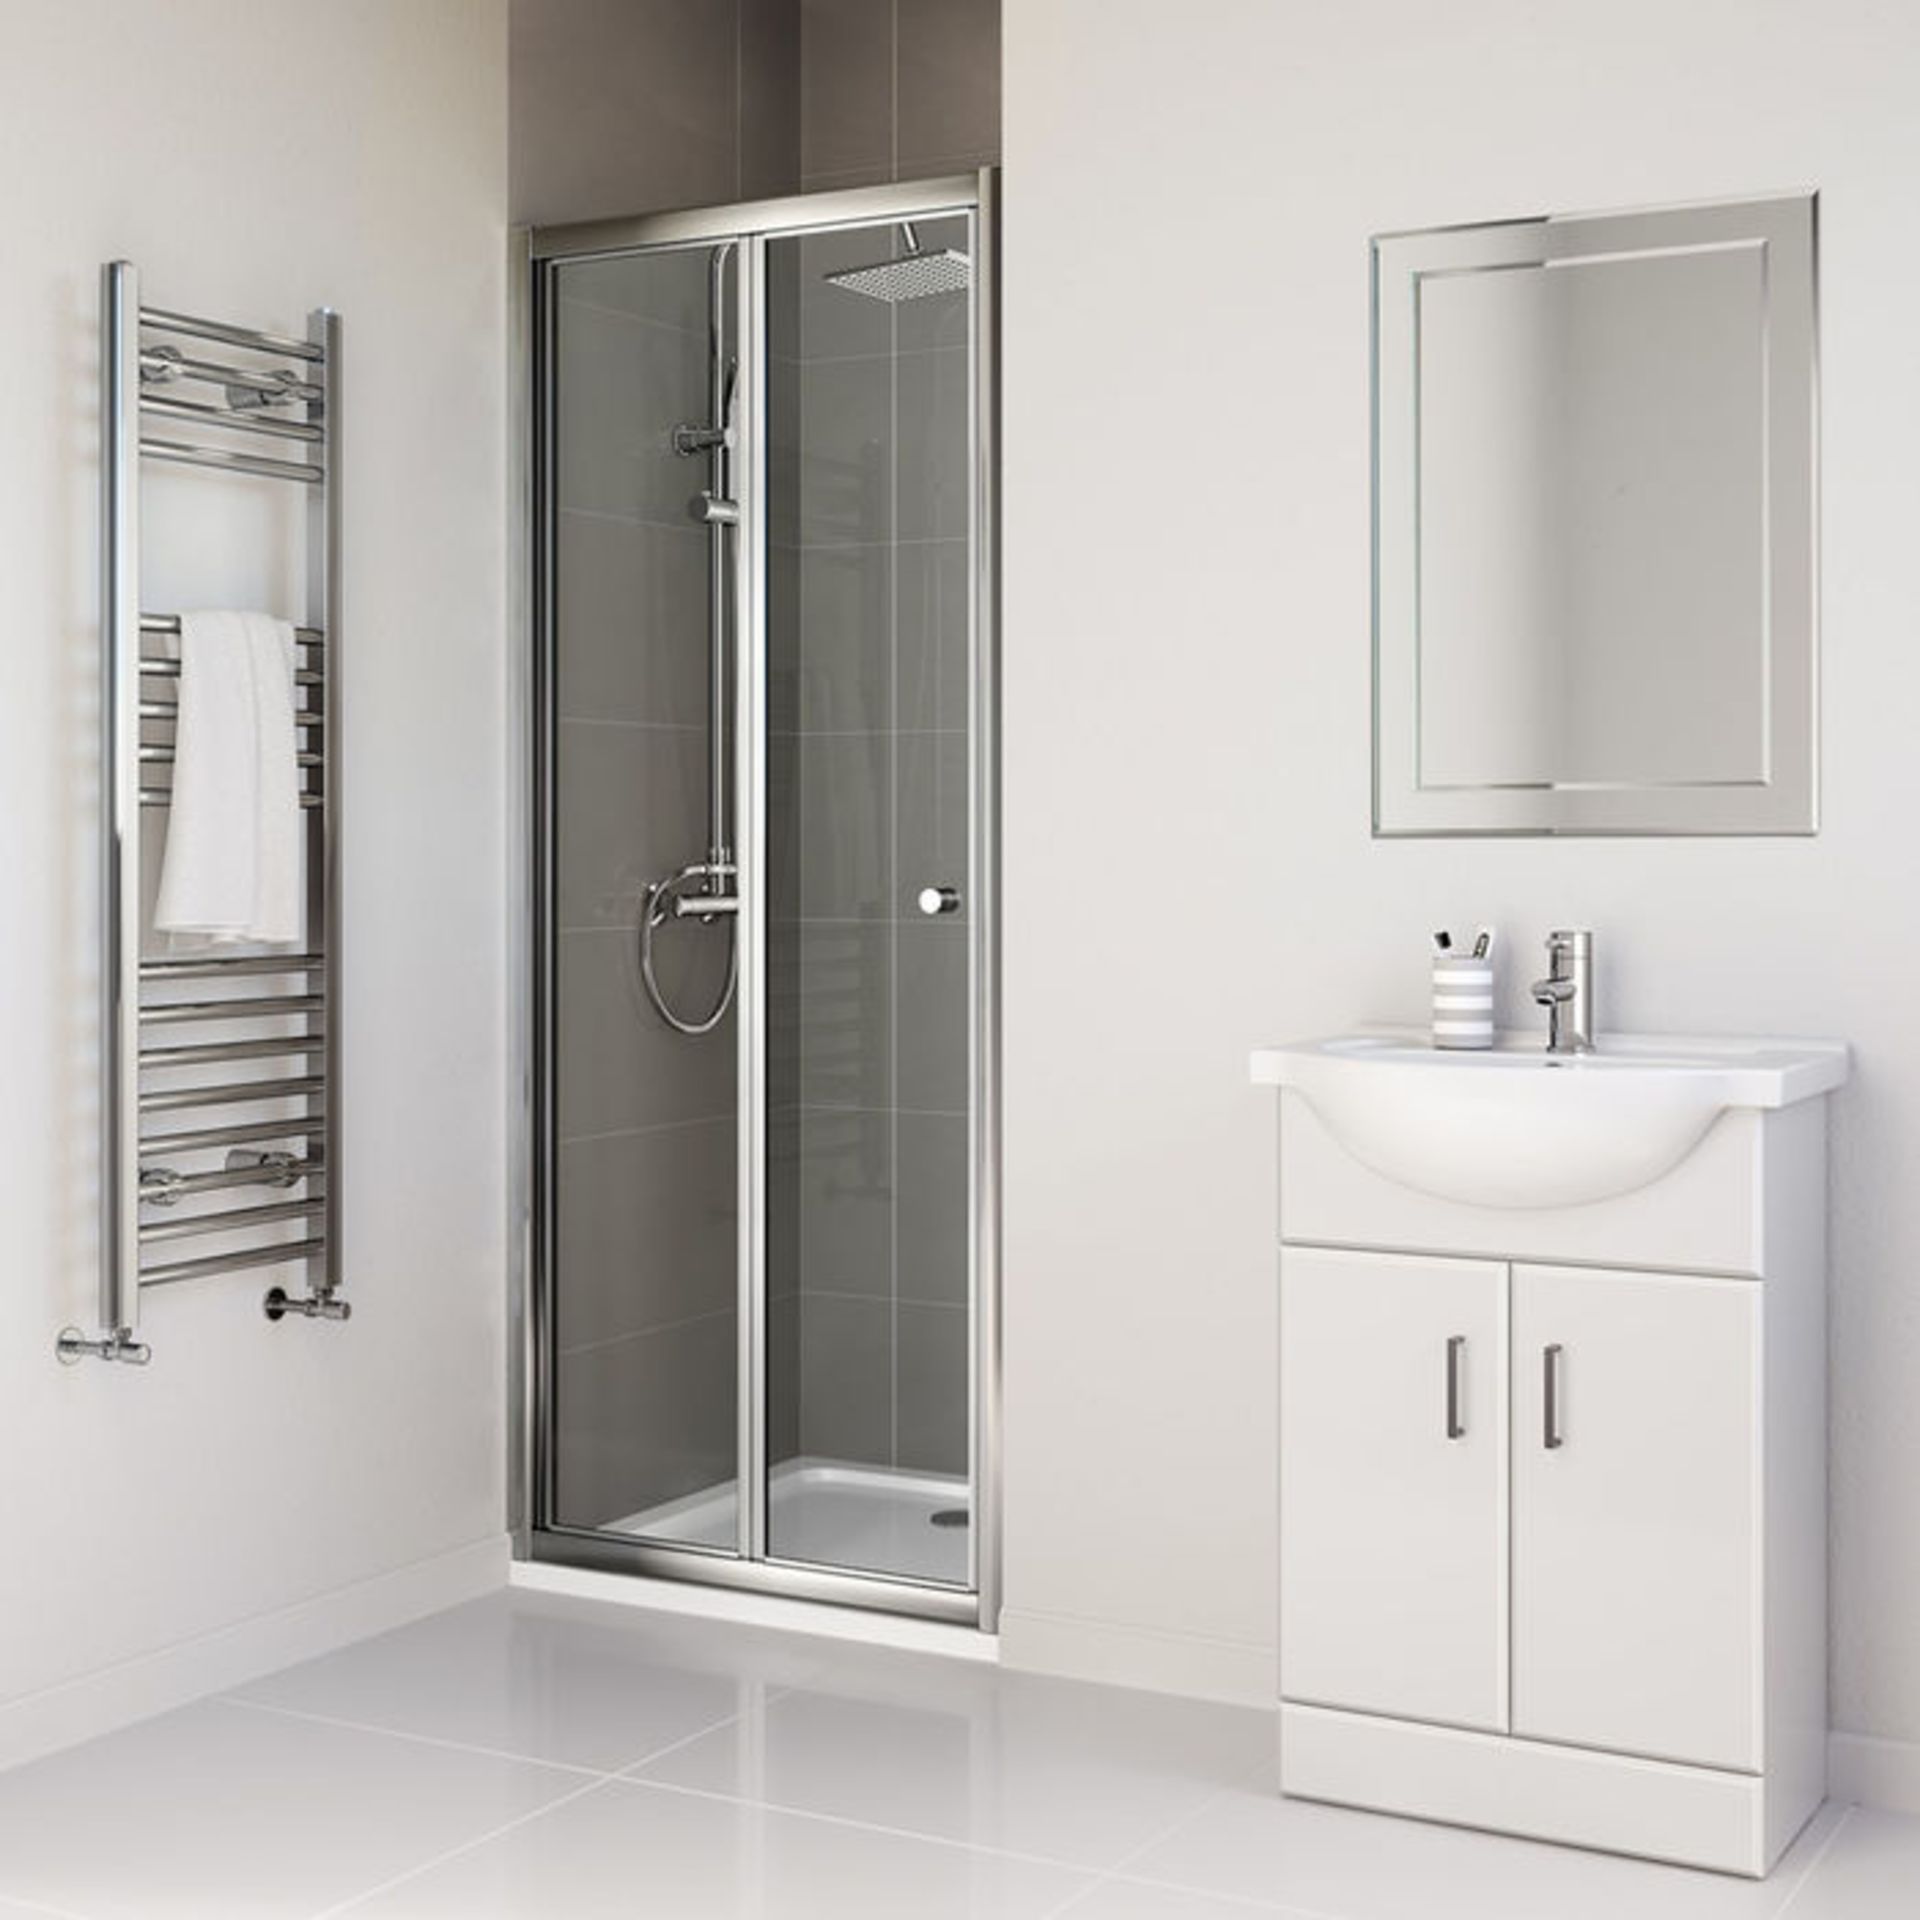 (PO14) 700mm - Elements Bi Fold Shower Door. RRP £299.99.4mm Safety GlassFully waterproof tested - Image 3 of 3